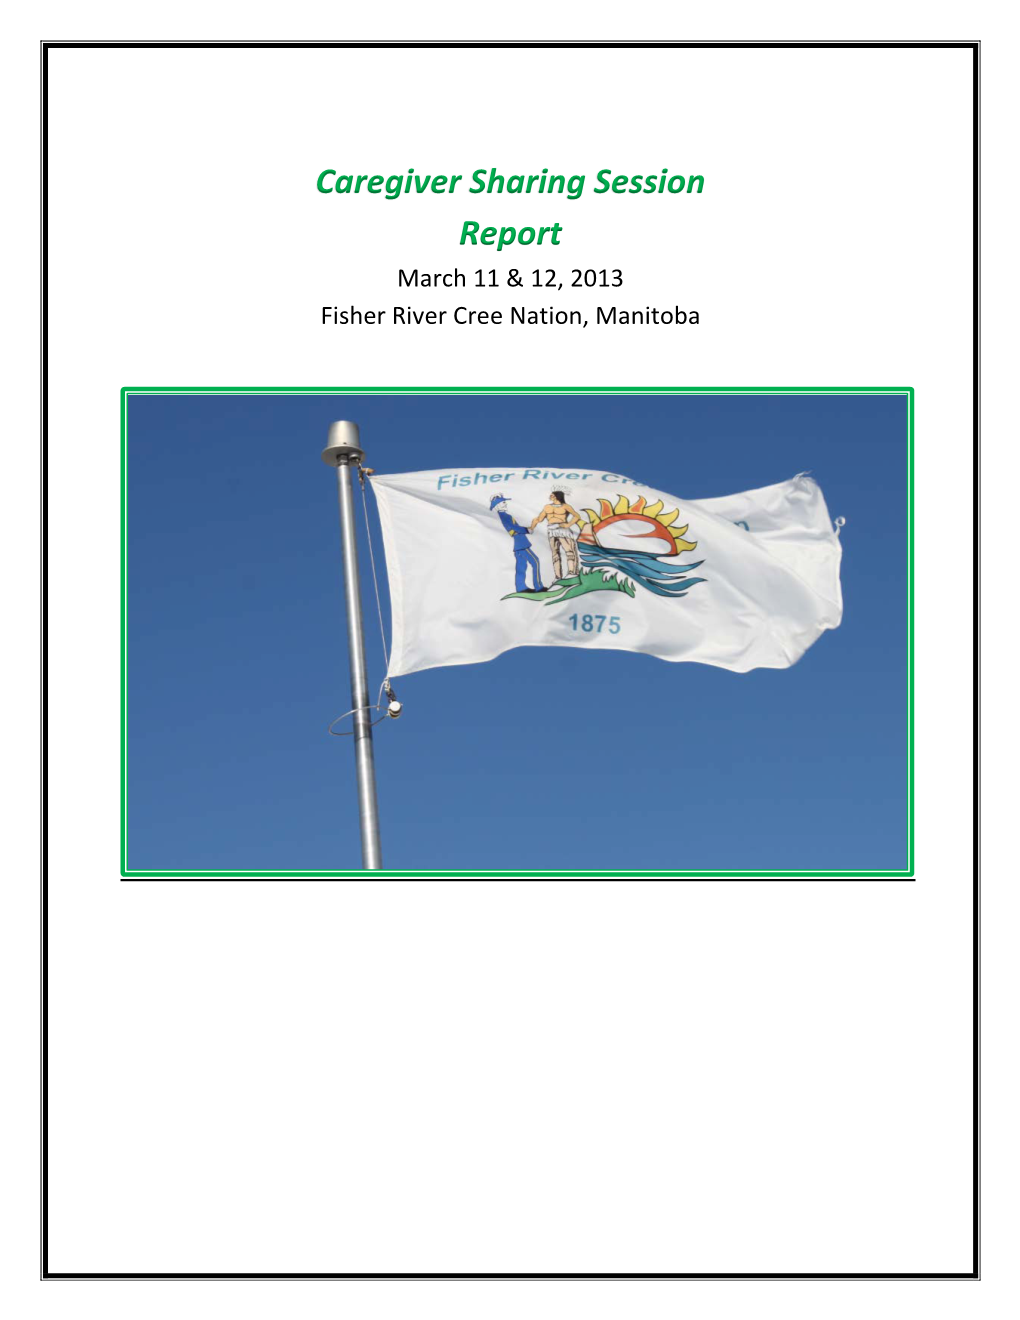 Caregiver Sharing Session Report March 11 & 12, 2013 Fisher River Cree Nation, Manitoba